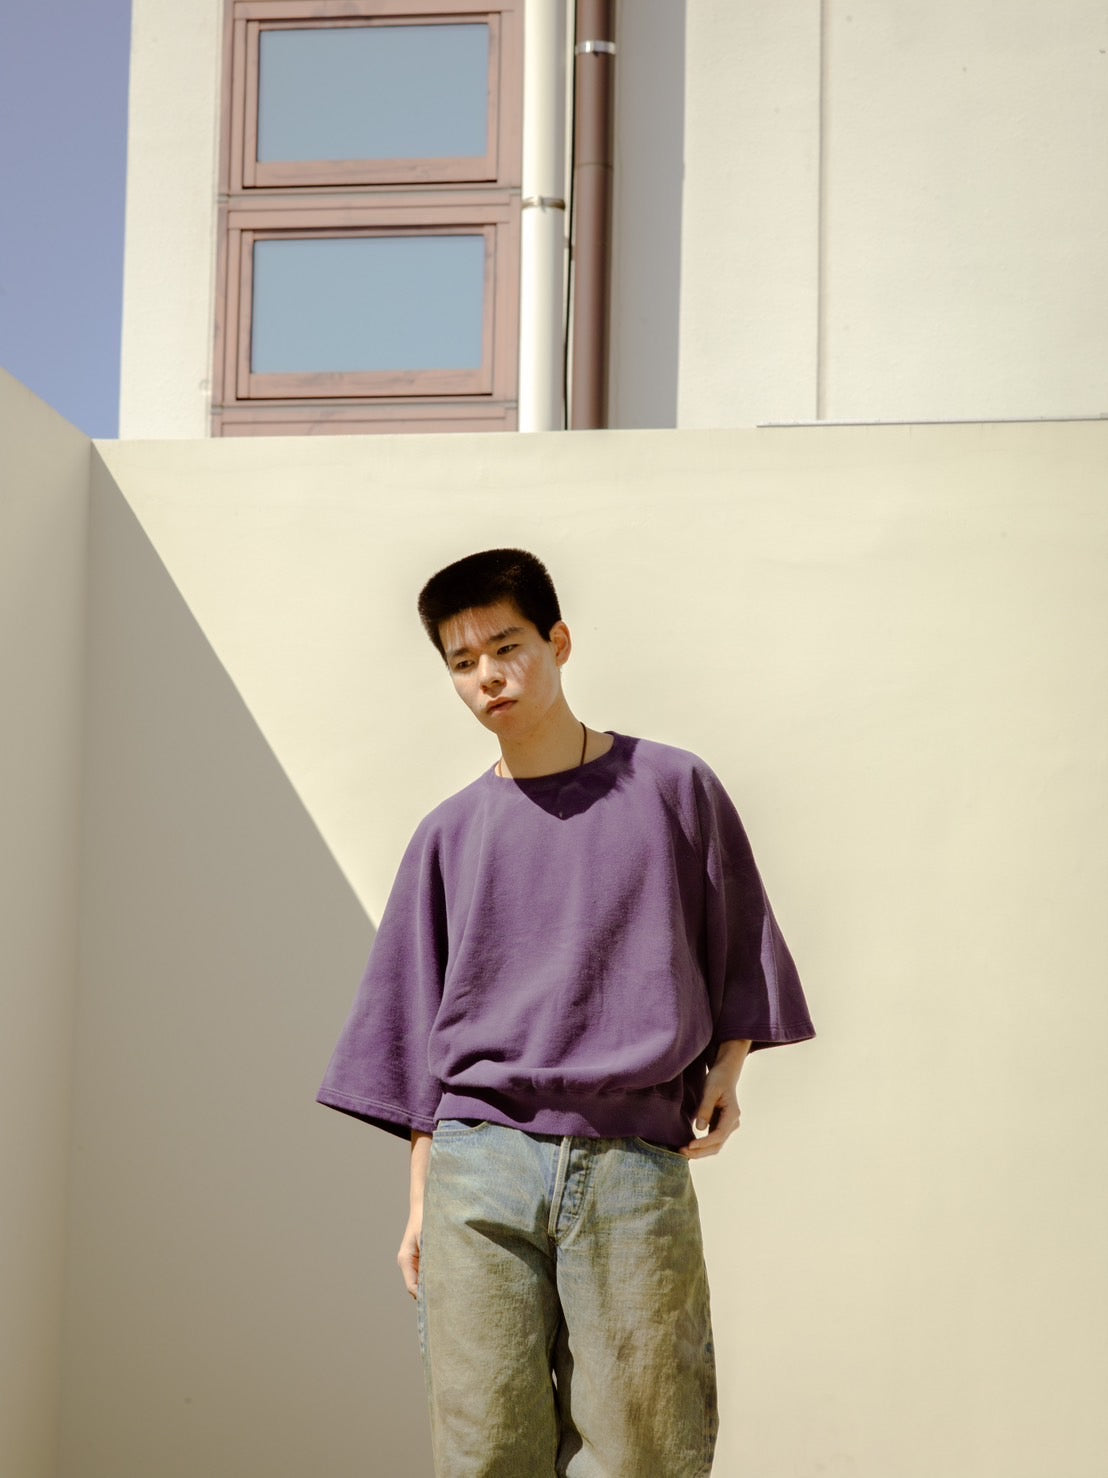 【REFOMED】10WASH S/S SWEATER PAN EXCLUSIVE - EX NAVY